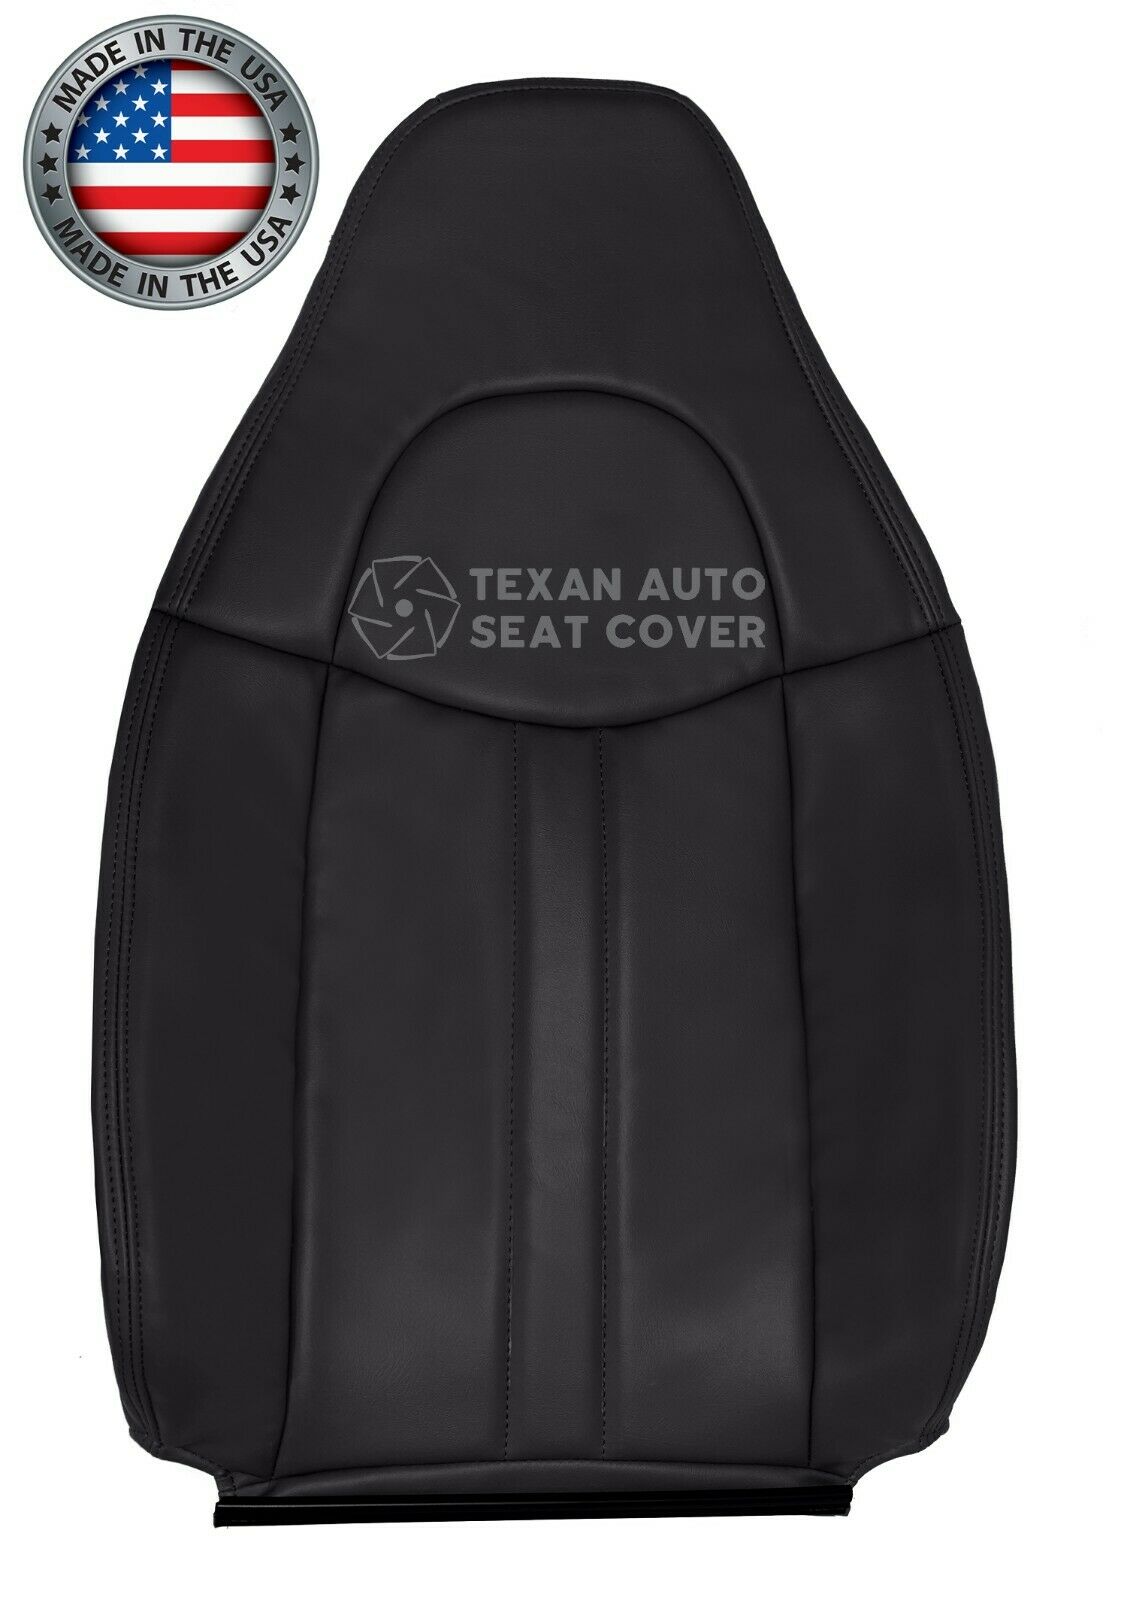 2003,2004,2005,2006,2007,2008, GMC SAVANA Passenger Side Lean Back Synthetic Leather Replacement Seat Cover Dark Gray